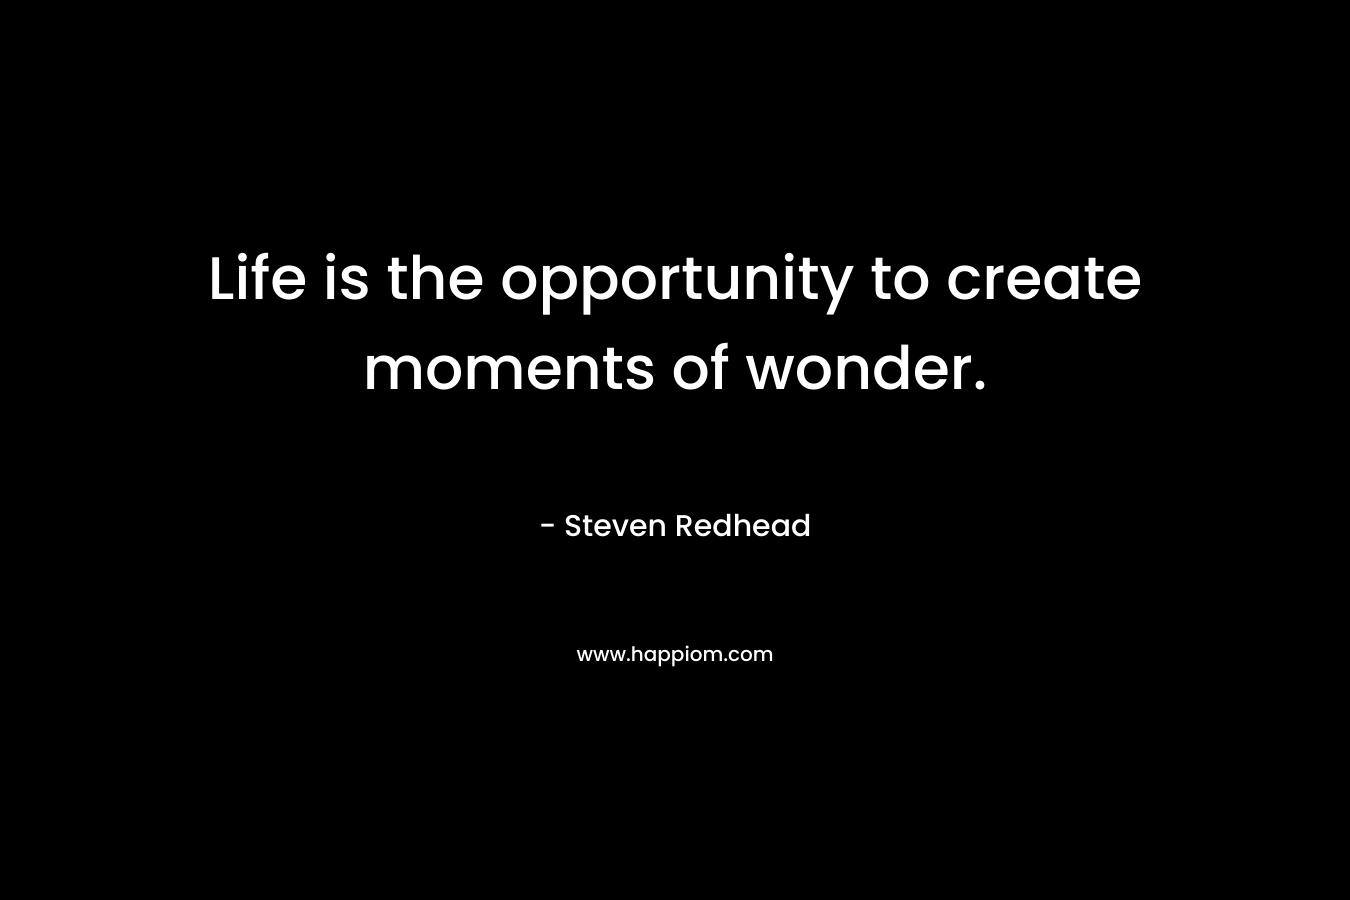 Life is the opportunity to create moments of wonder.